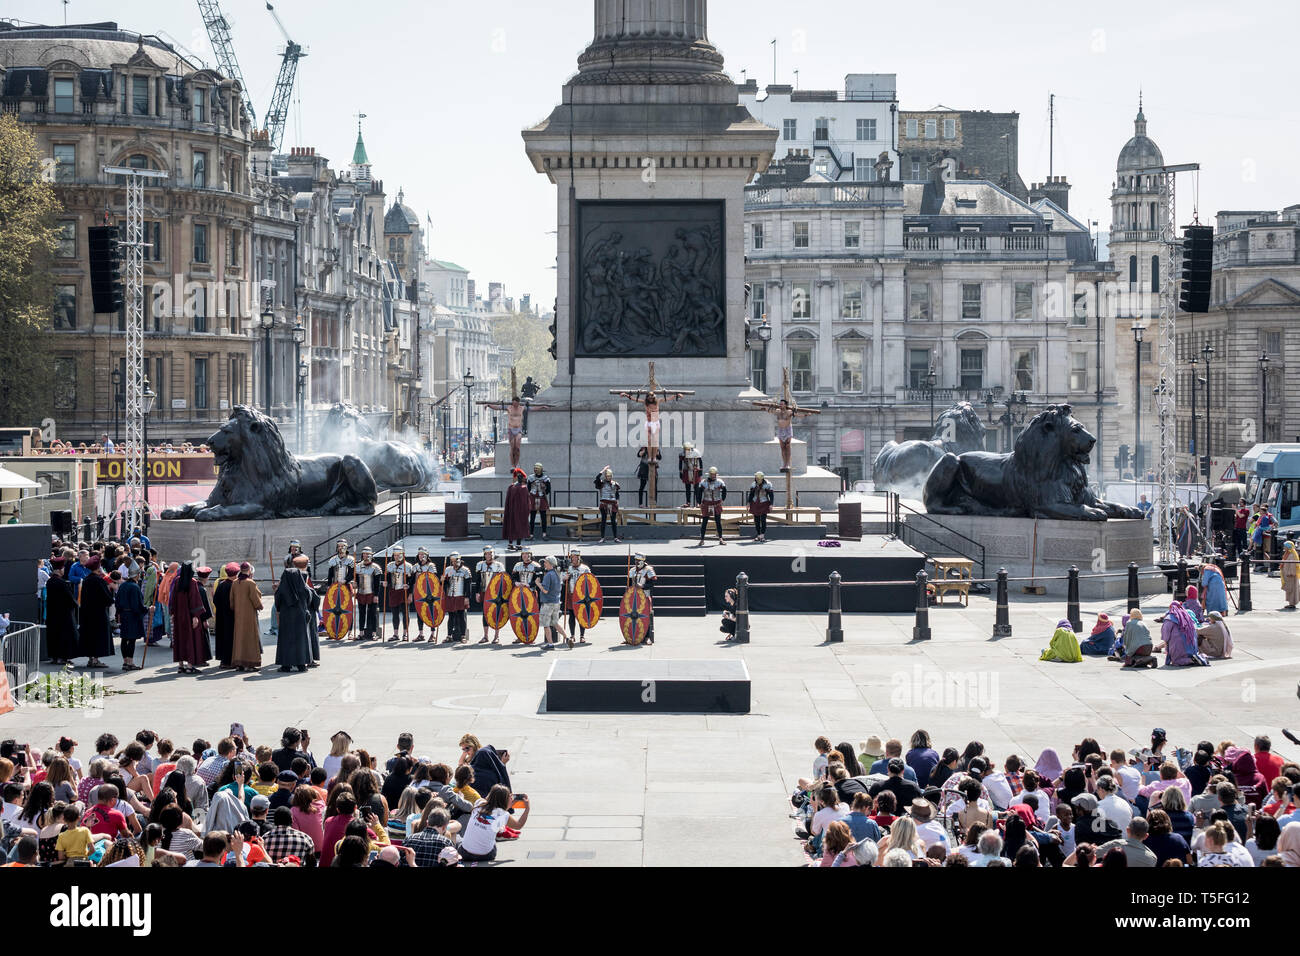 The Passion of Jesus play by the Wintershall Charitable Trust in Trafalgar Square on Good Friday, London, UK Stock Photo